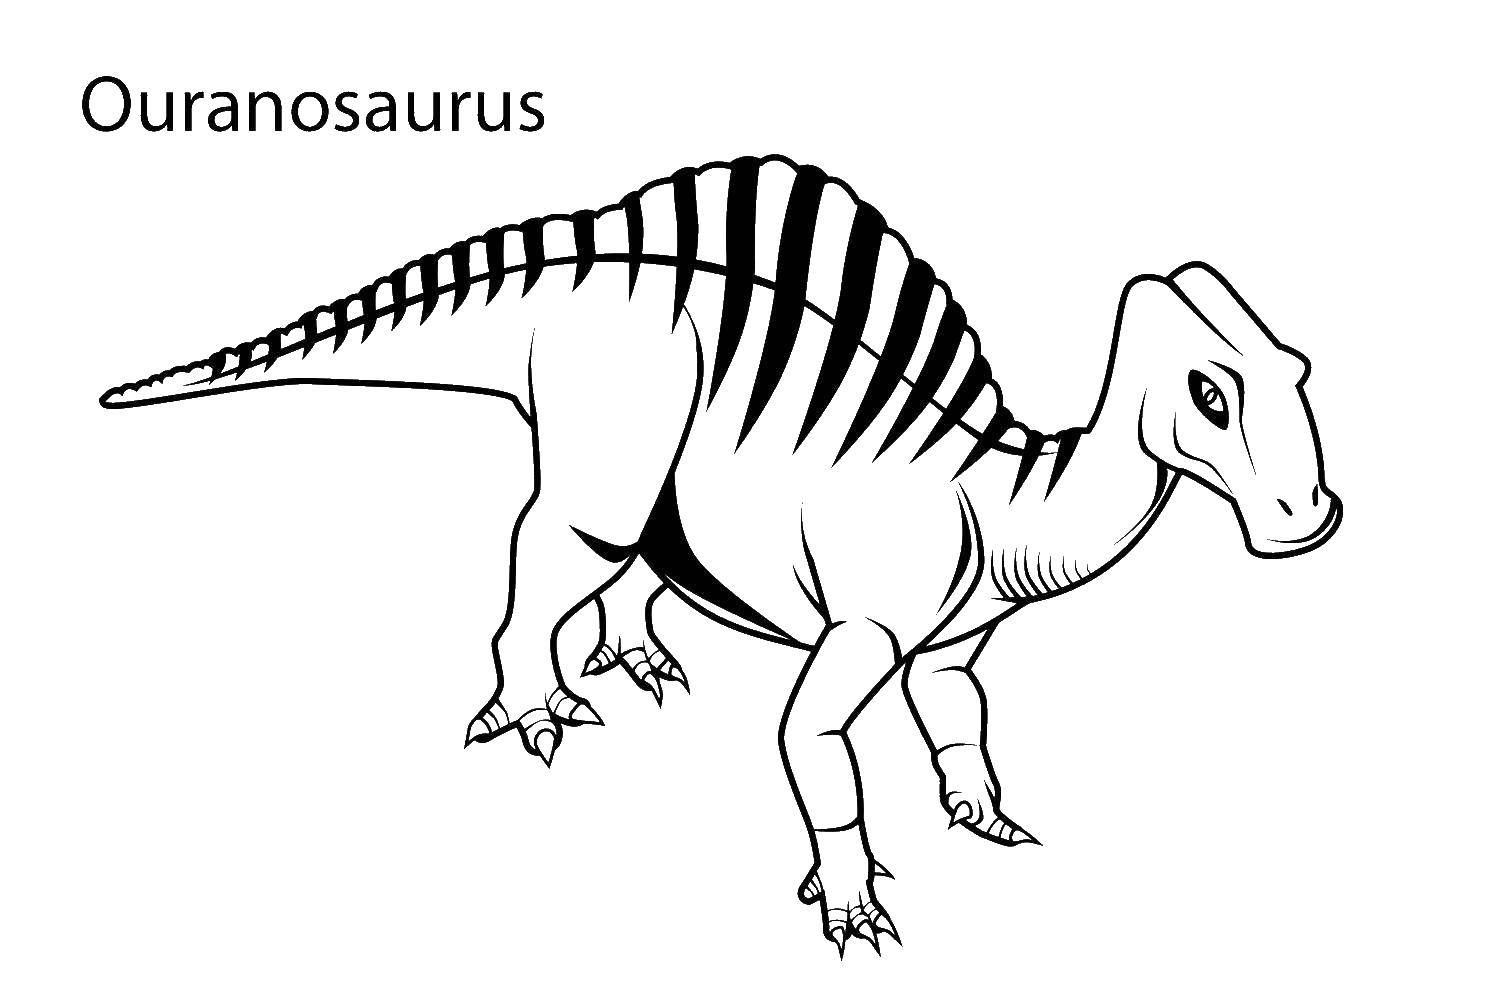 Coloring Herbivorous oranother. Category dinosaur. Tags:  Dinosaurs, Oranother.